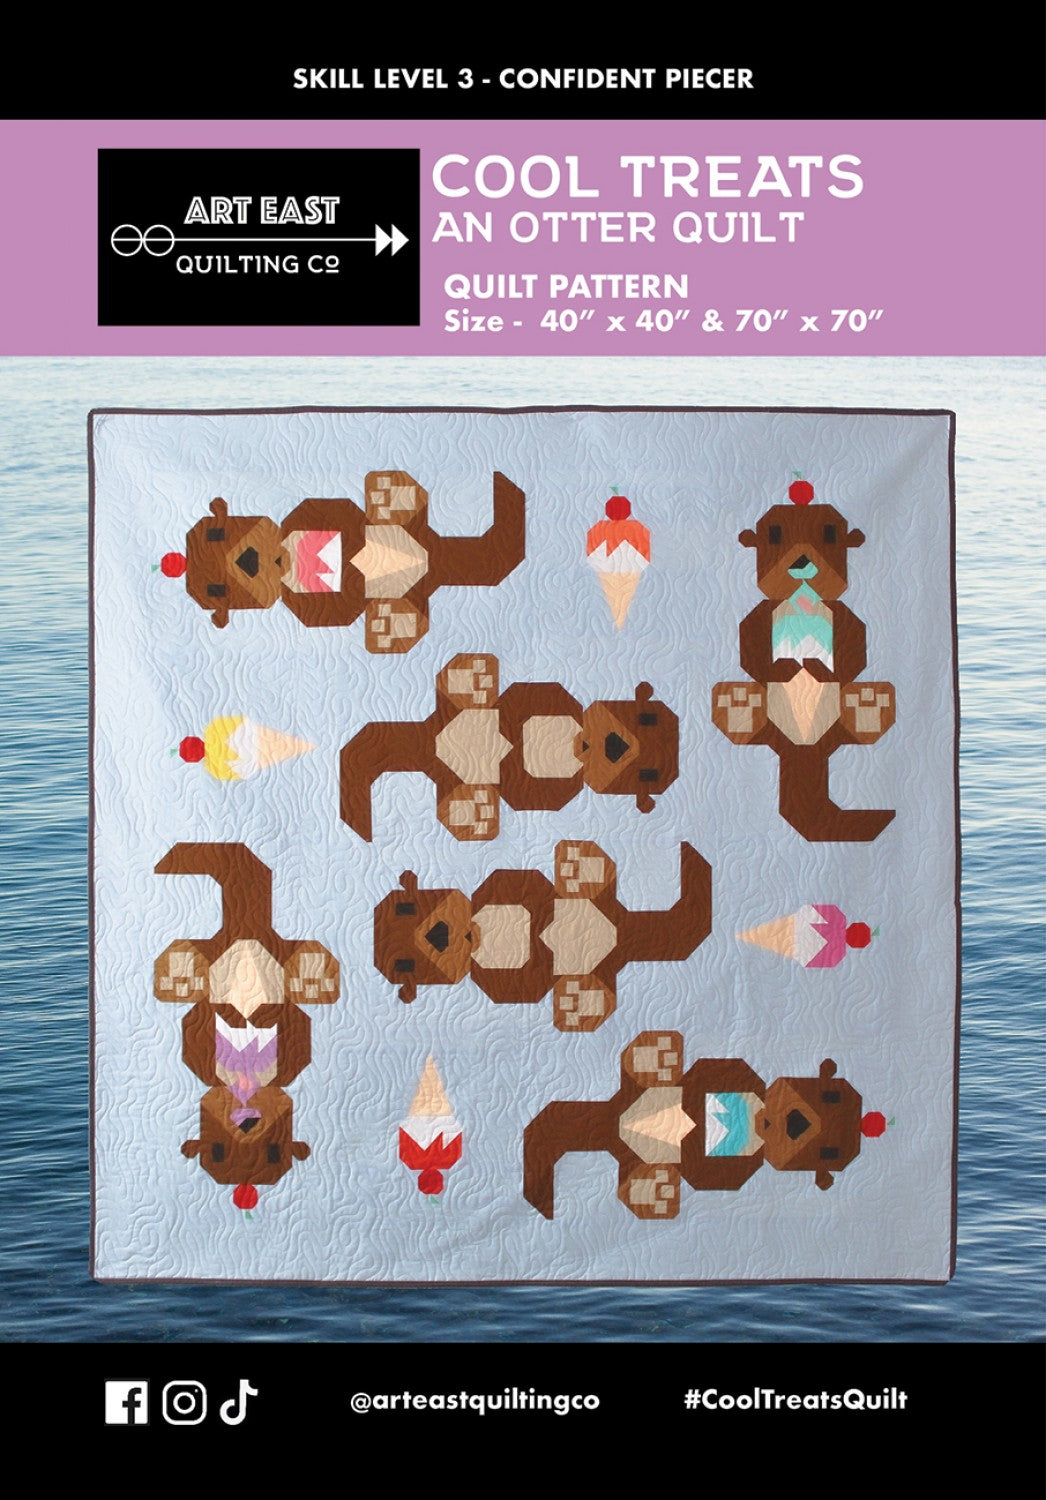 Cool Treats An Otter Quilt Pattern from Art East Quilting Co. - AECT0323